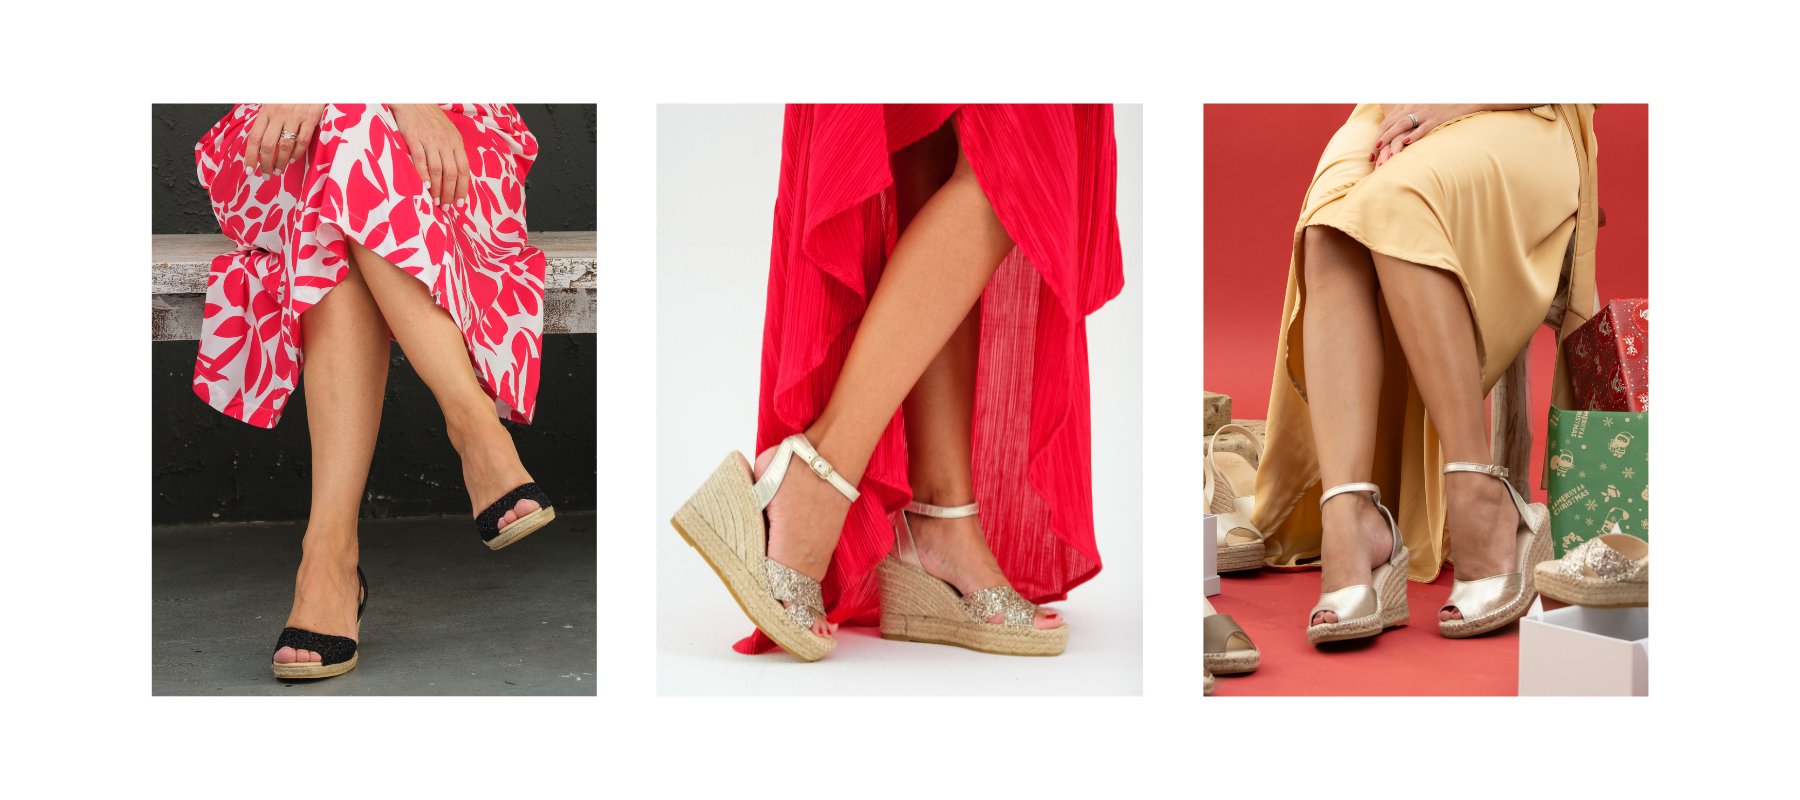 Holiday Style Guide: From Festive Errands to Glamorous Parties with Shoeq - Shoeq